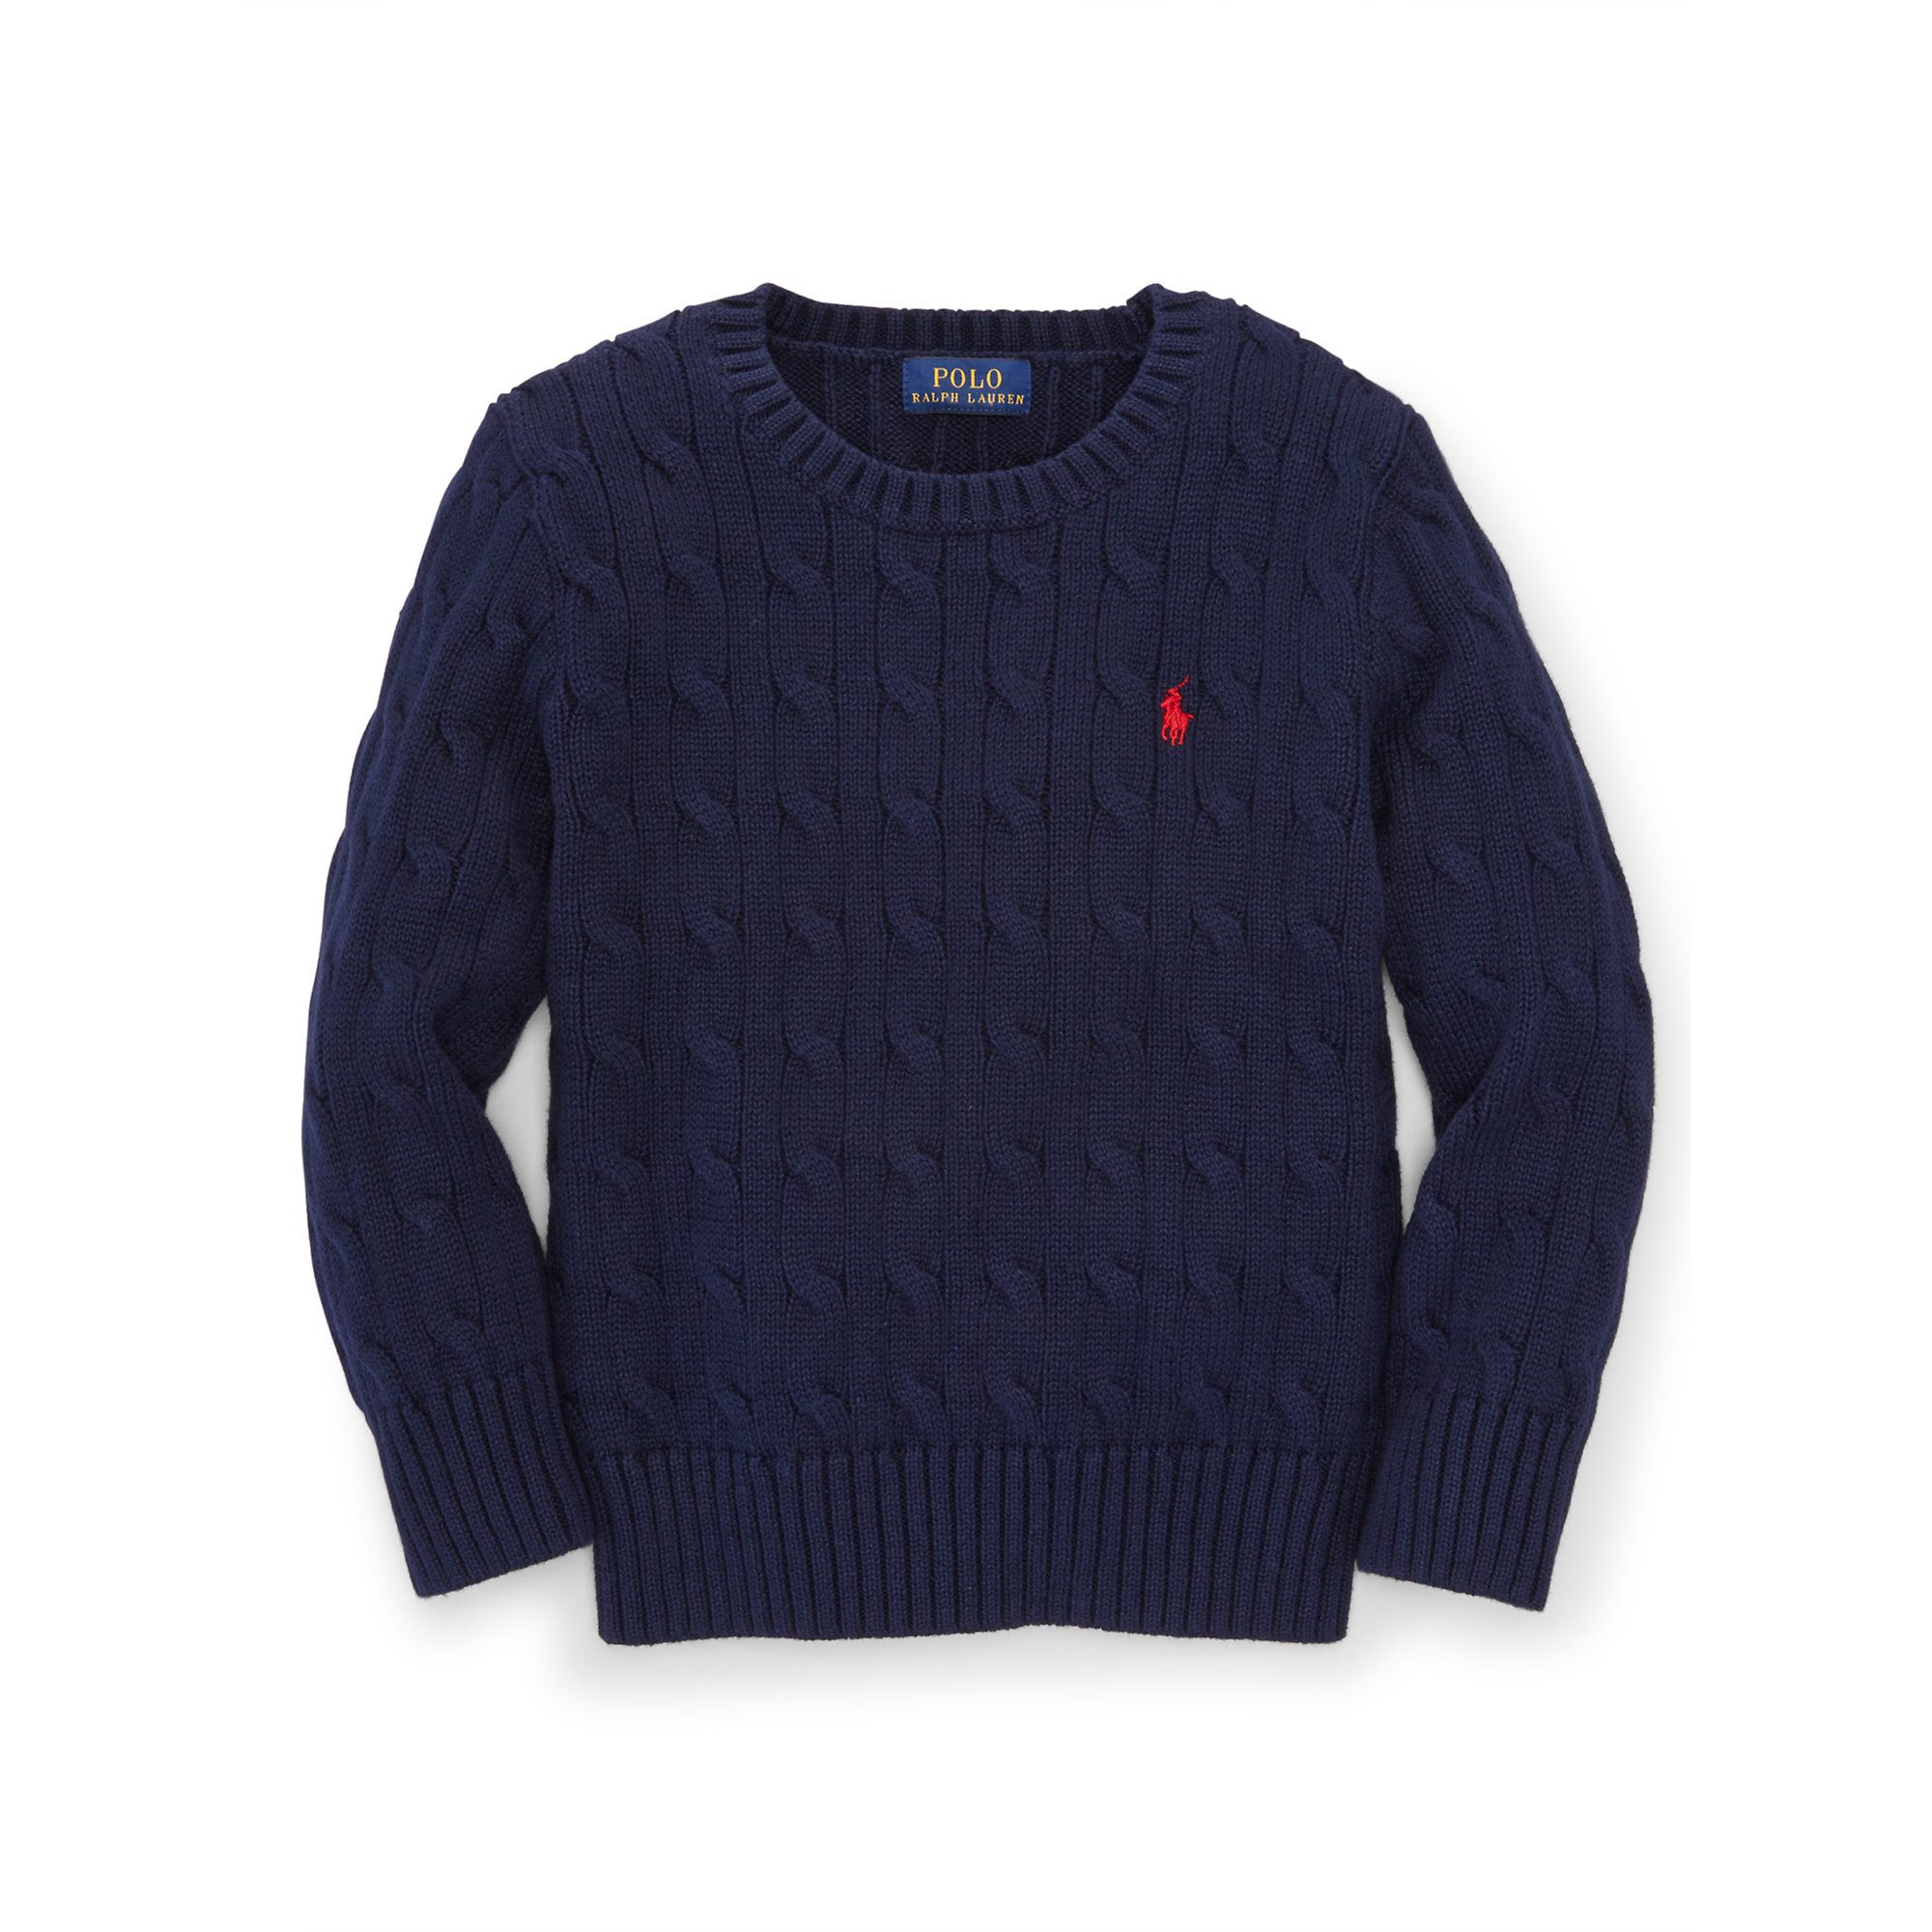 Ralph Lauren Cable-knit Cotton Sweater in Blue for Men - Lyst